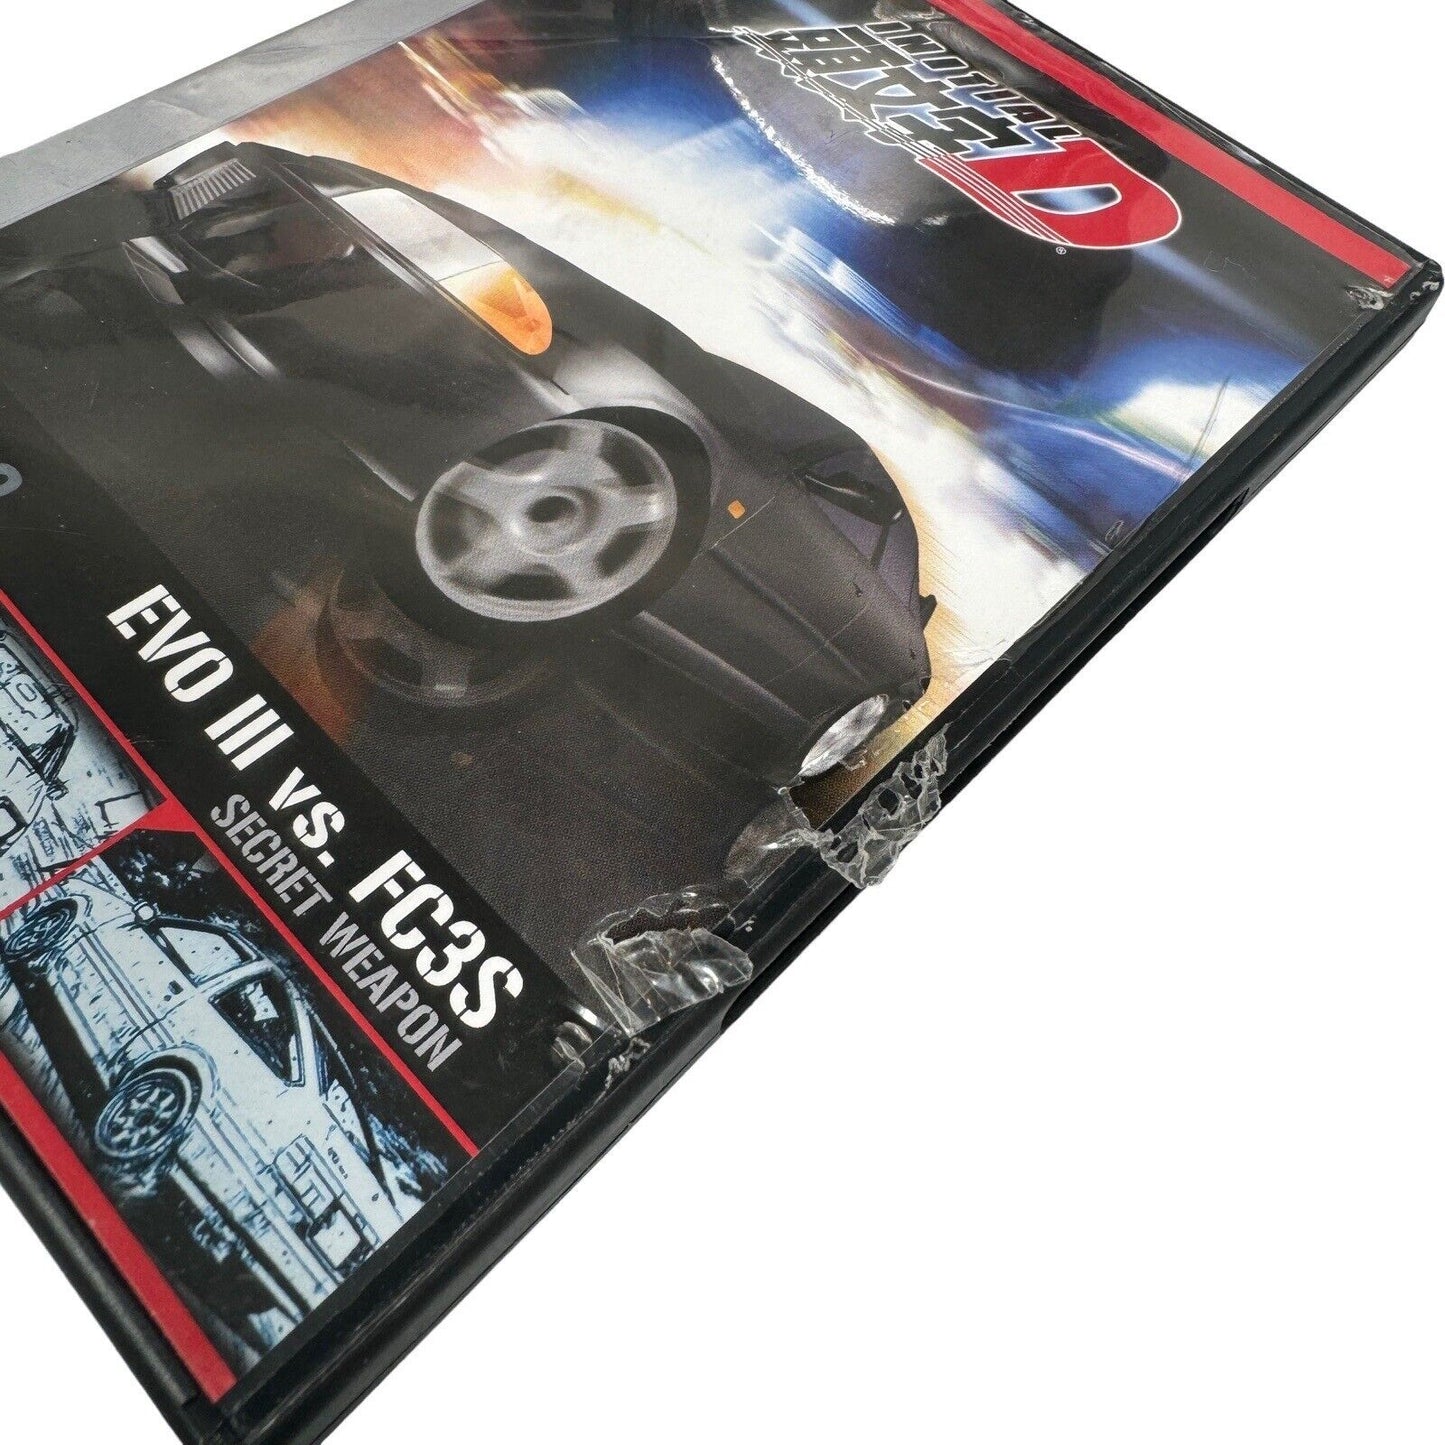 Initial D Racing Anime Volumes 8-14 (DVD) - Cards And Inserts Included